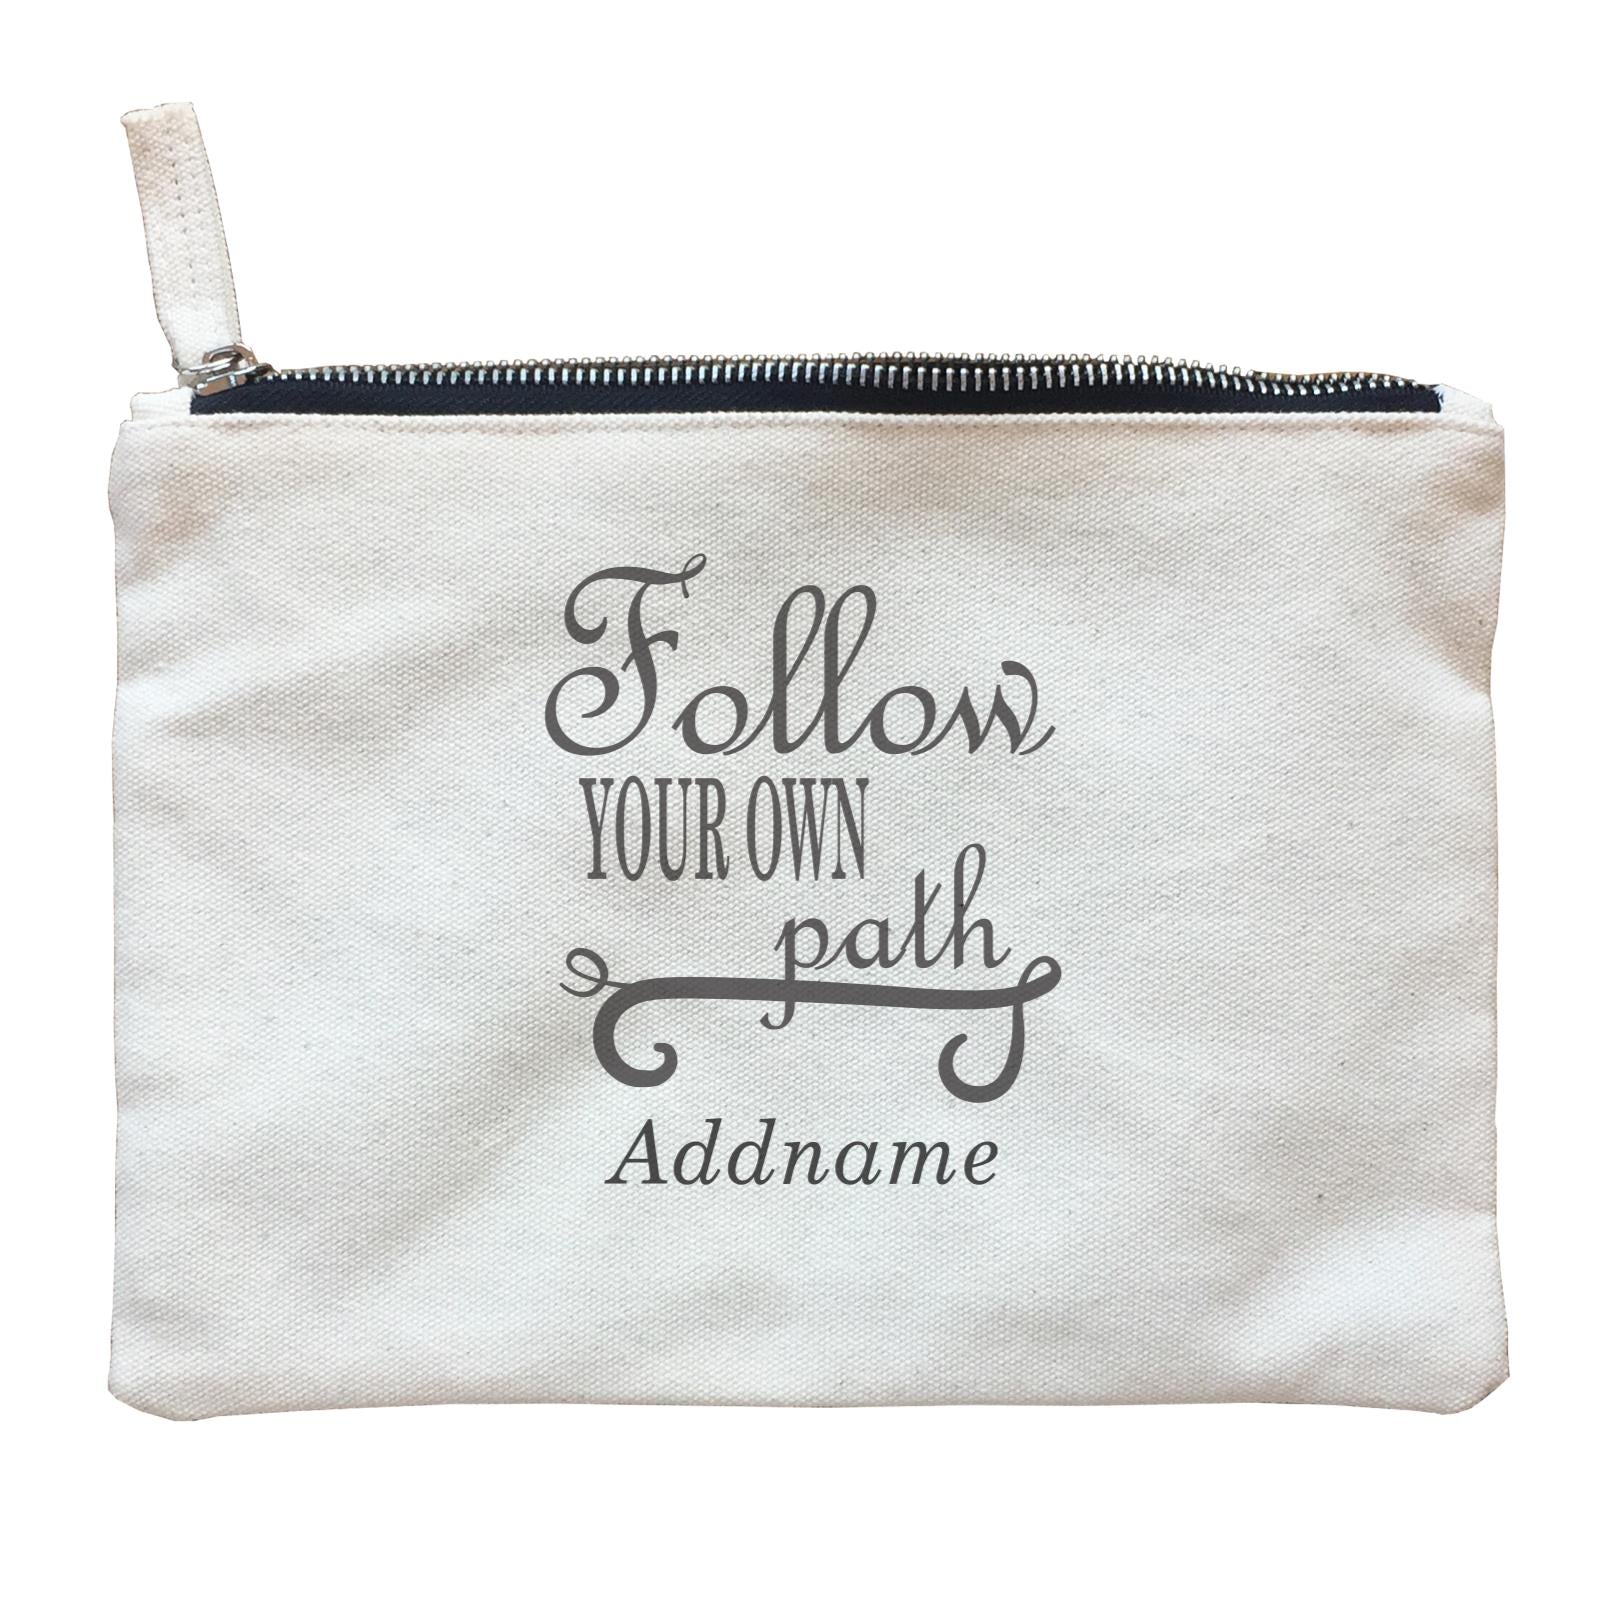 Inspiration Quotes Follow Your Own Path Addname Zipper Pouch